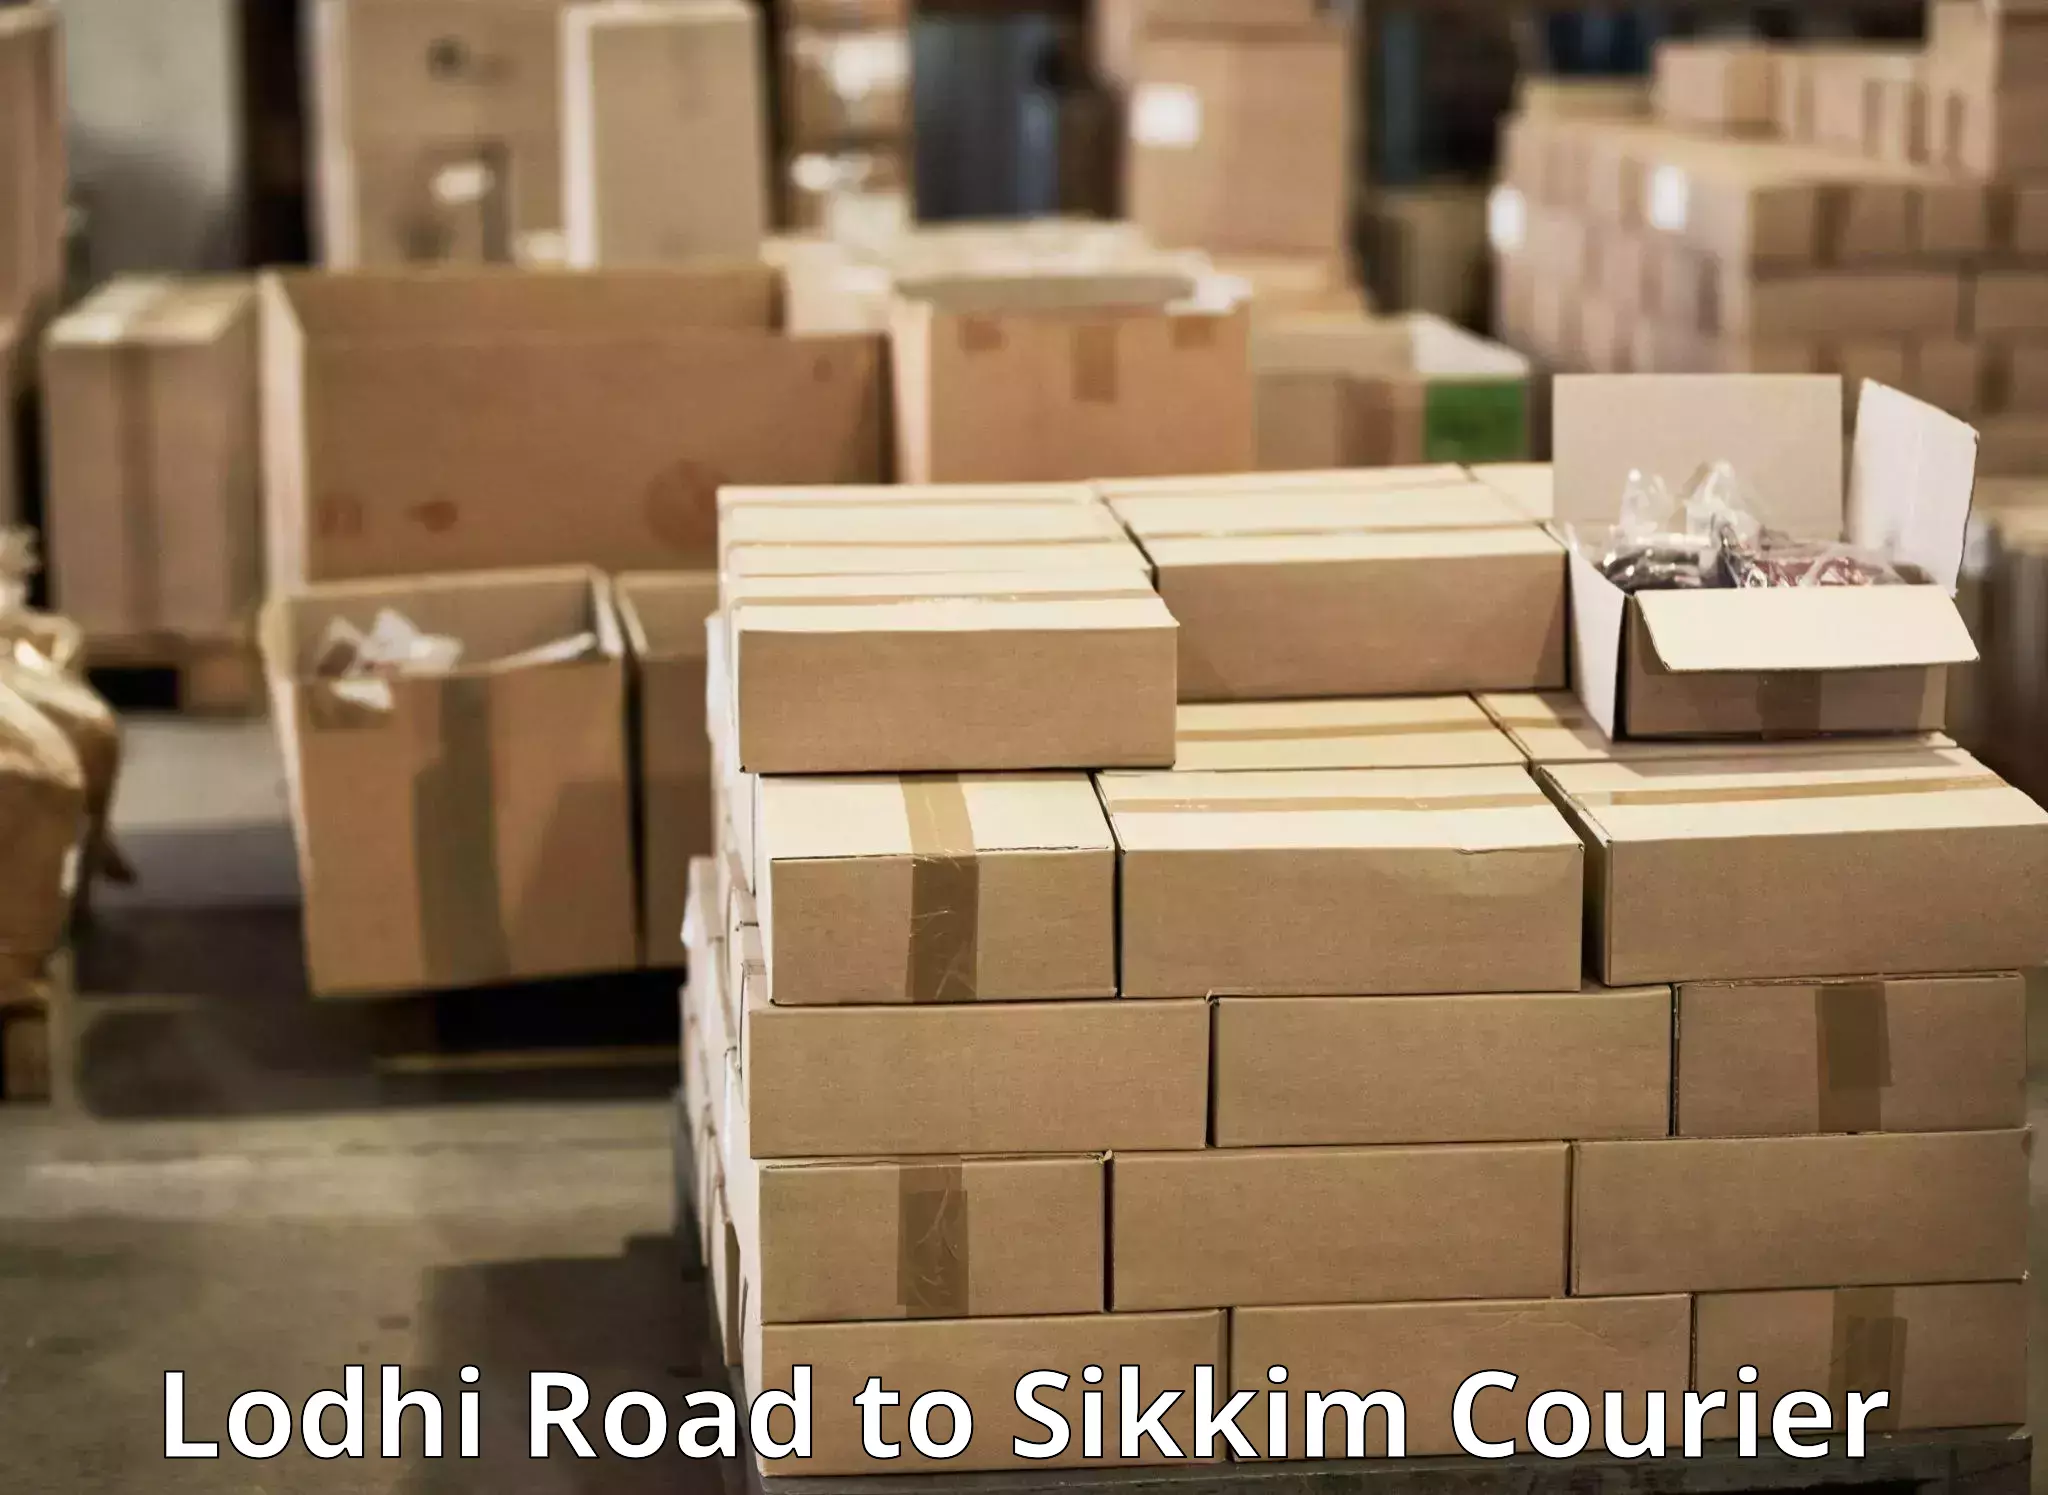 Round-the-clock parcel delivery Lodhi Road to South Sikkim